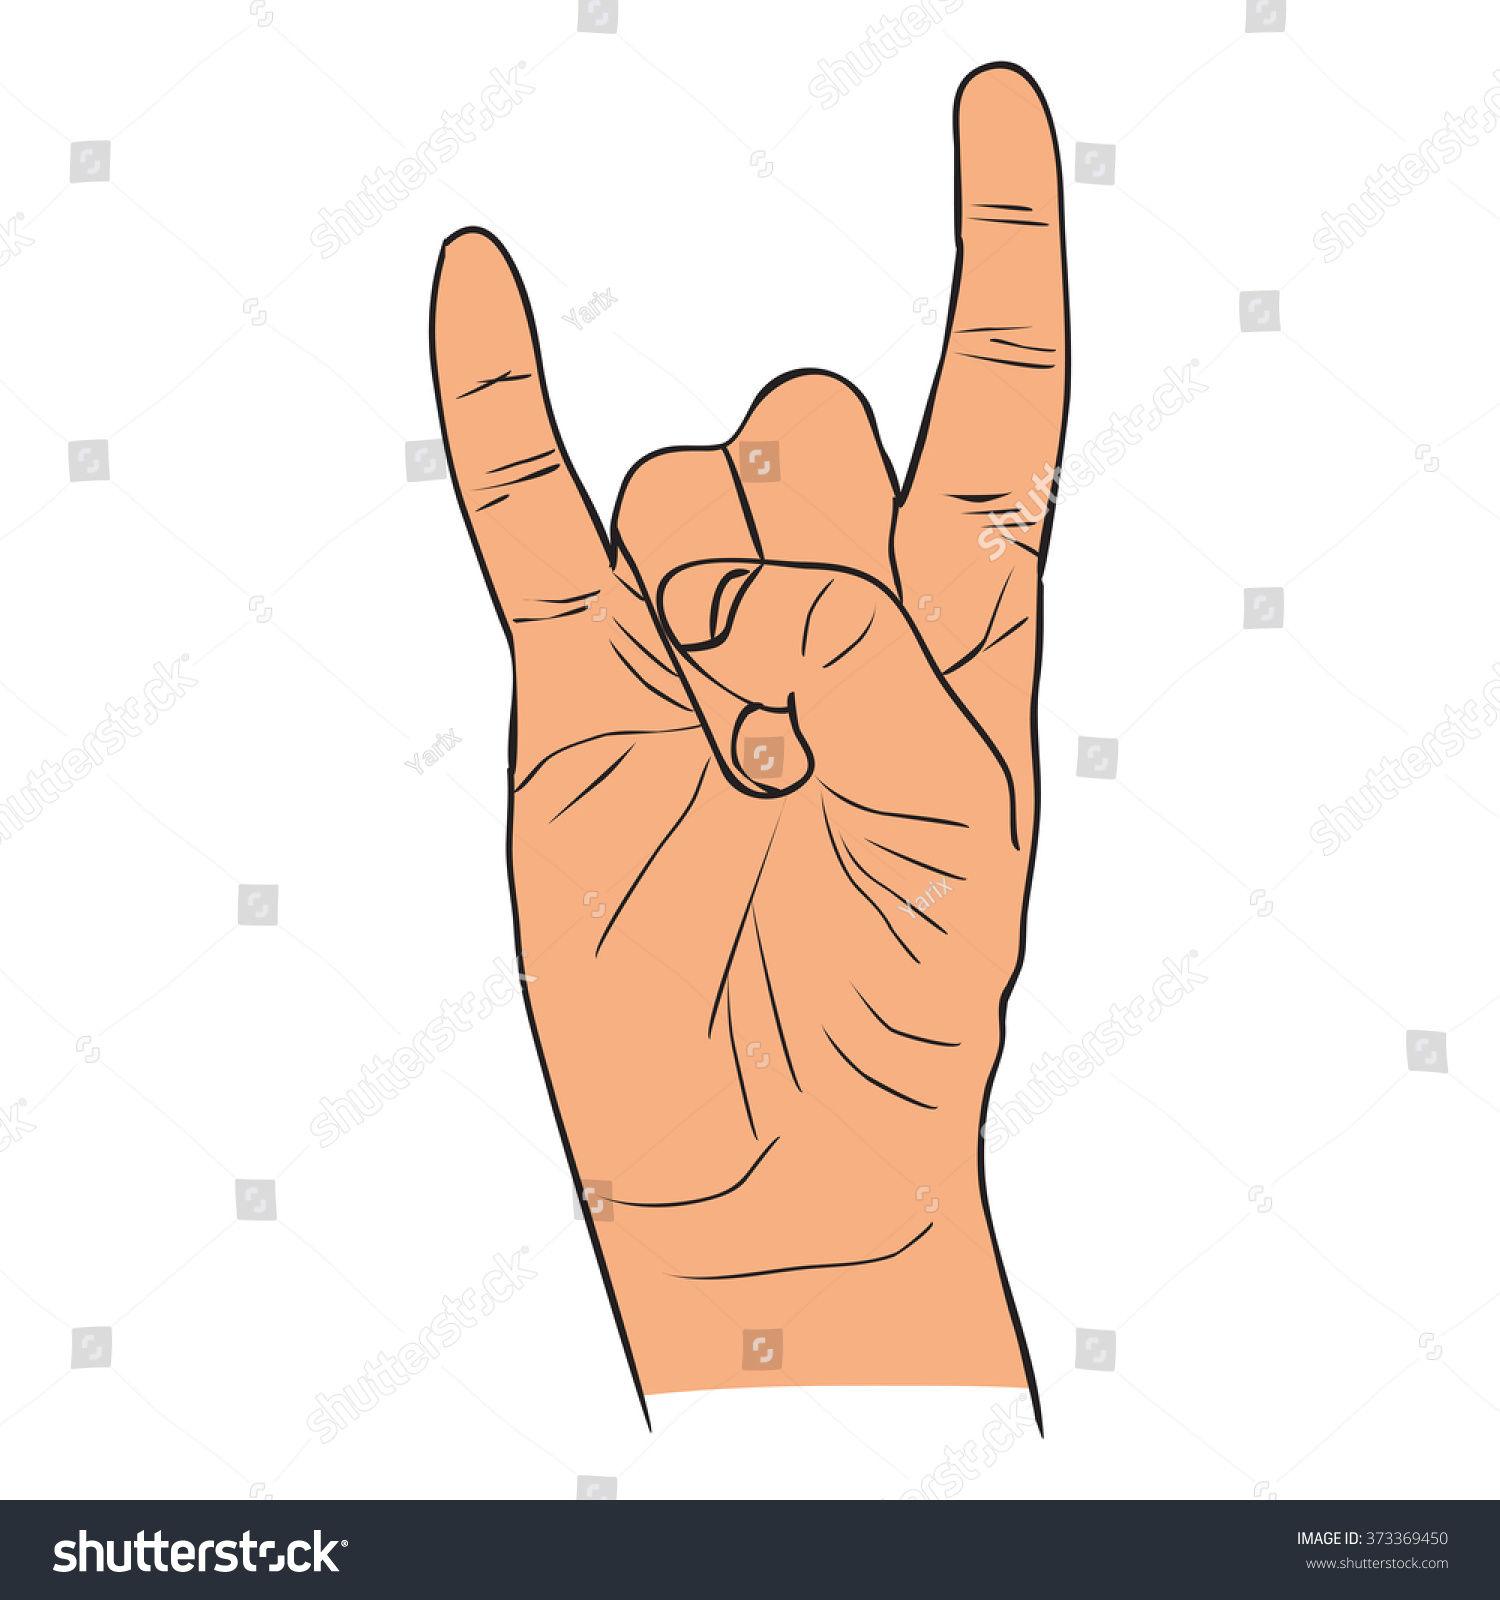 Vector Hand Icon Isolated On White Stock Vector 373369450 - Shutterstock